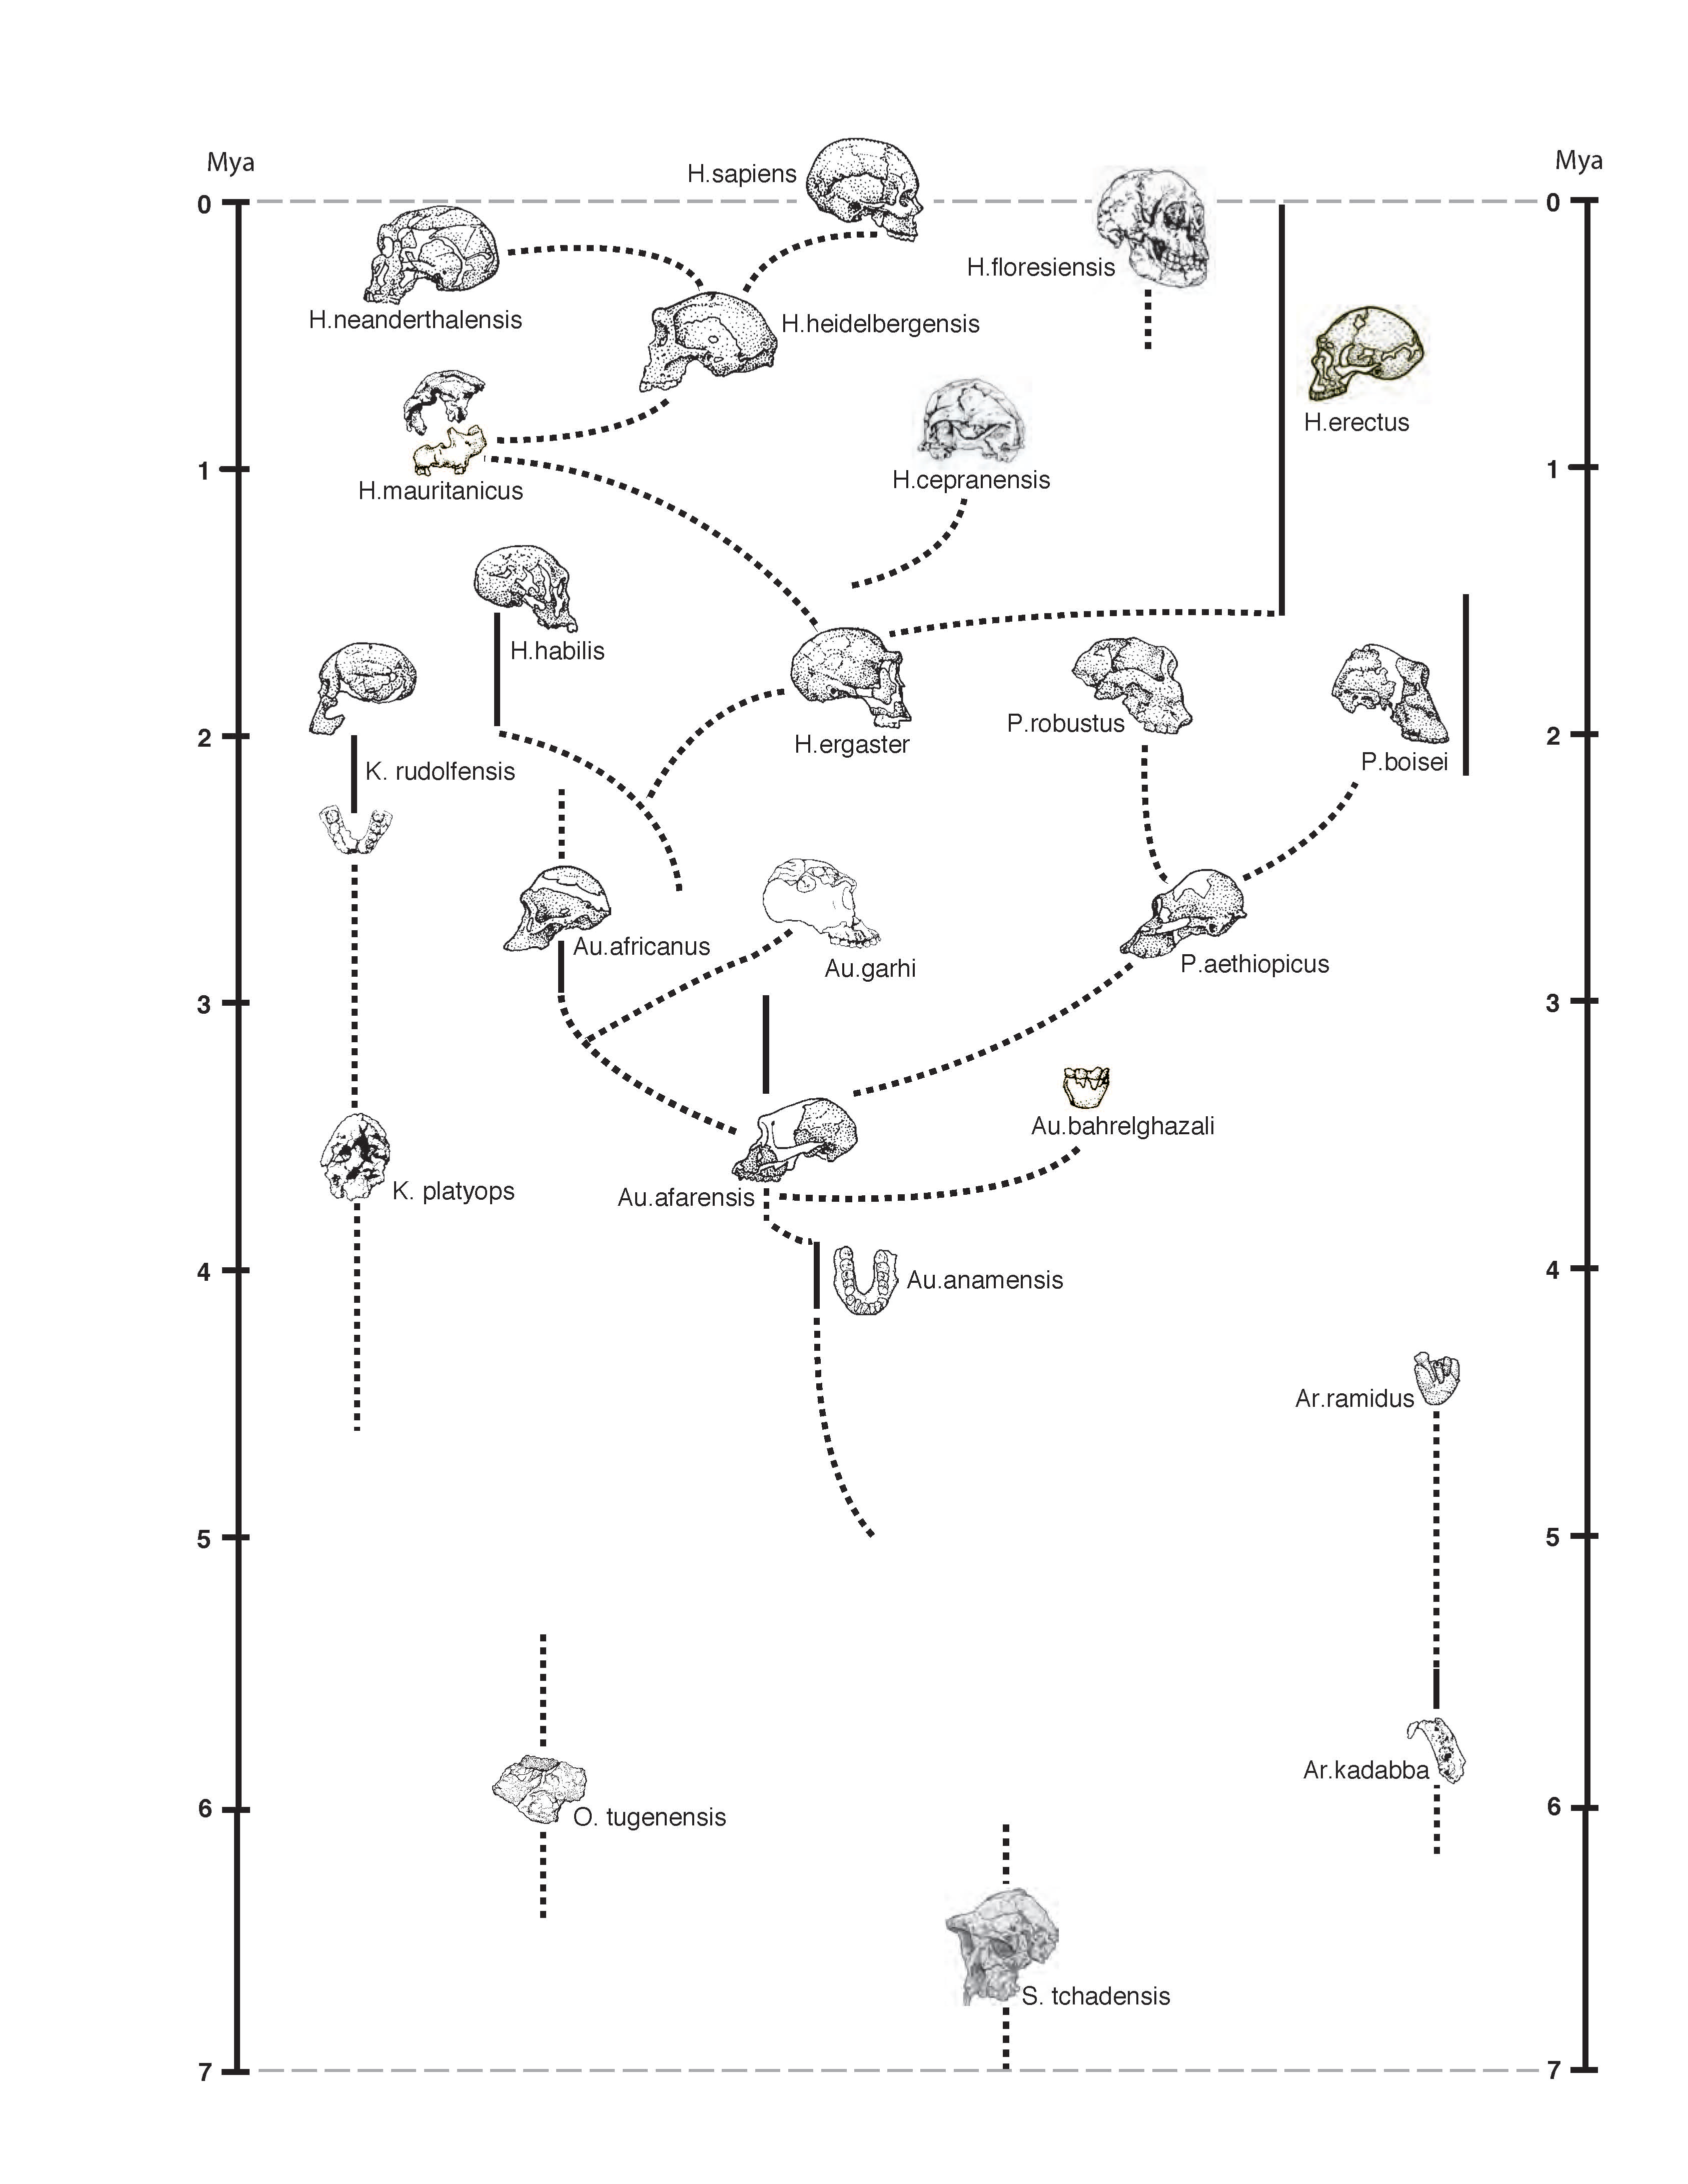 tattersall-hominids-r.png